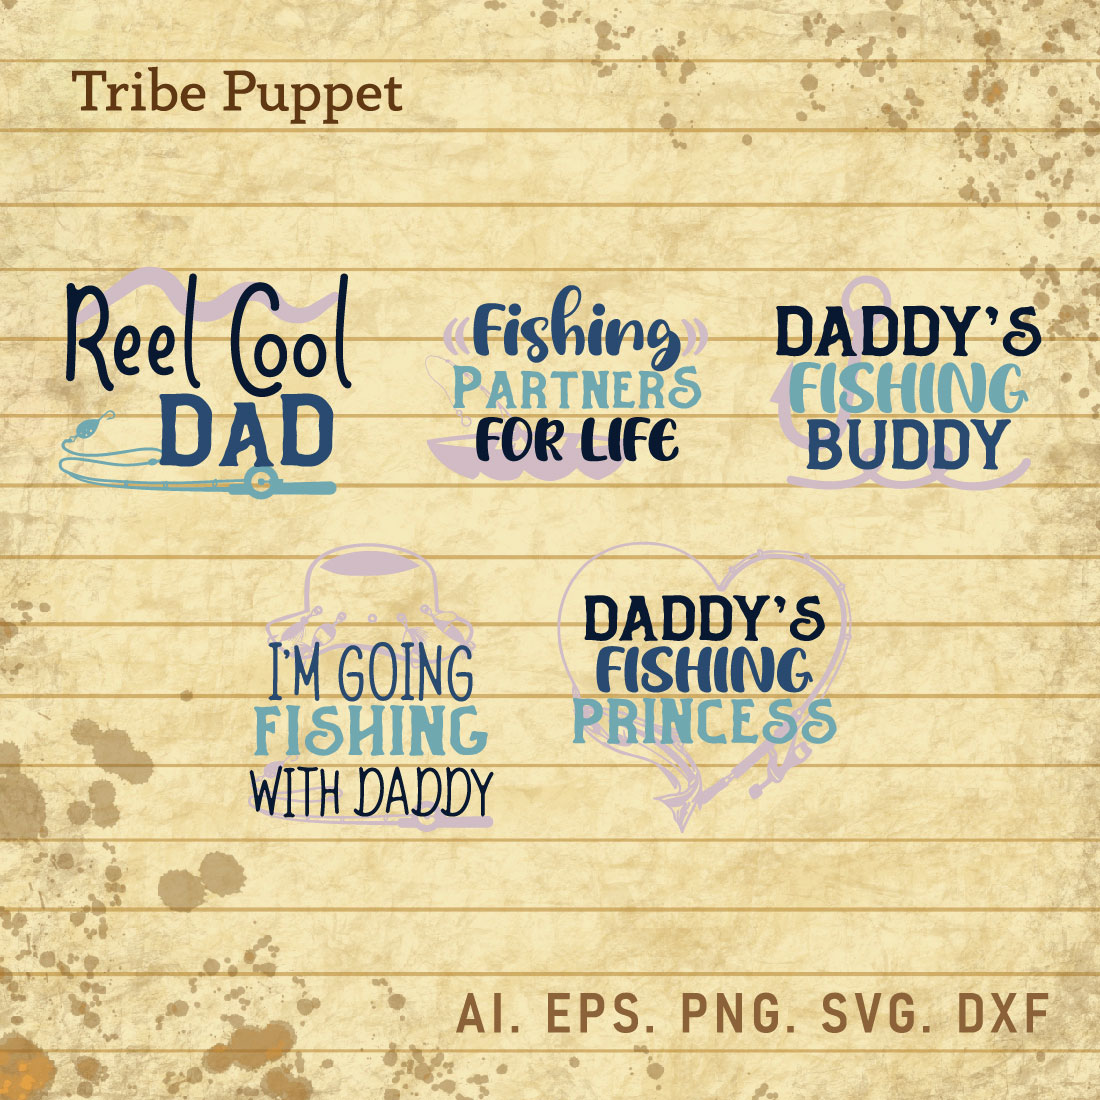 5 Dad Quotes Pack cover image.